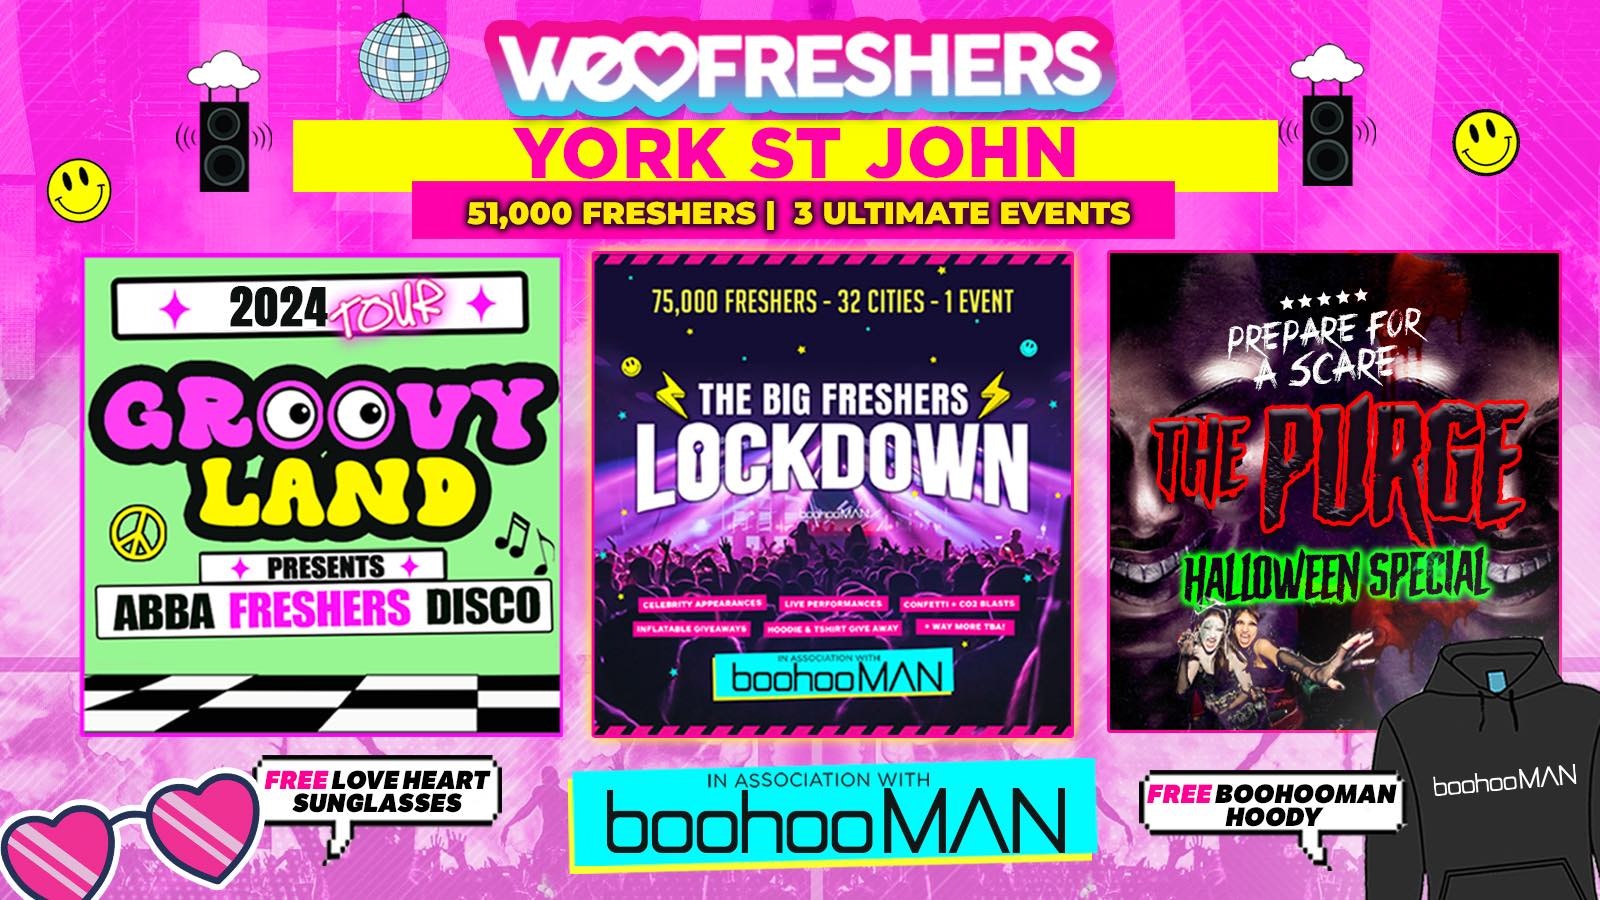 WE LOVE YORK ST. JOHNS FRESHERS 2024 in association with boohooMAN – 3 EVENTS❗